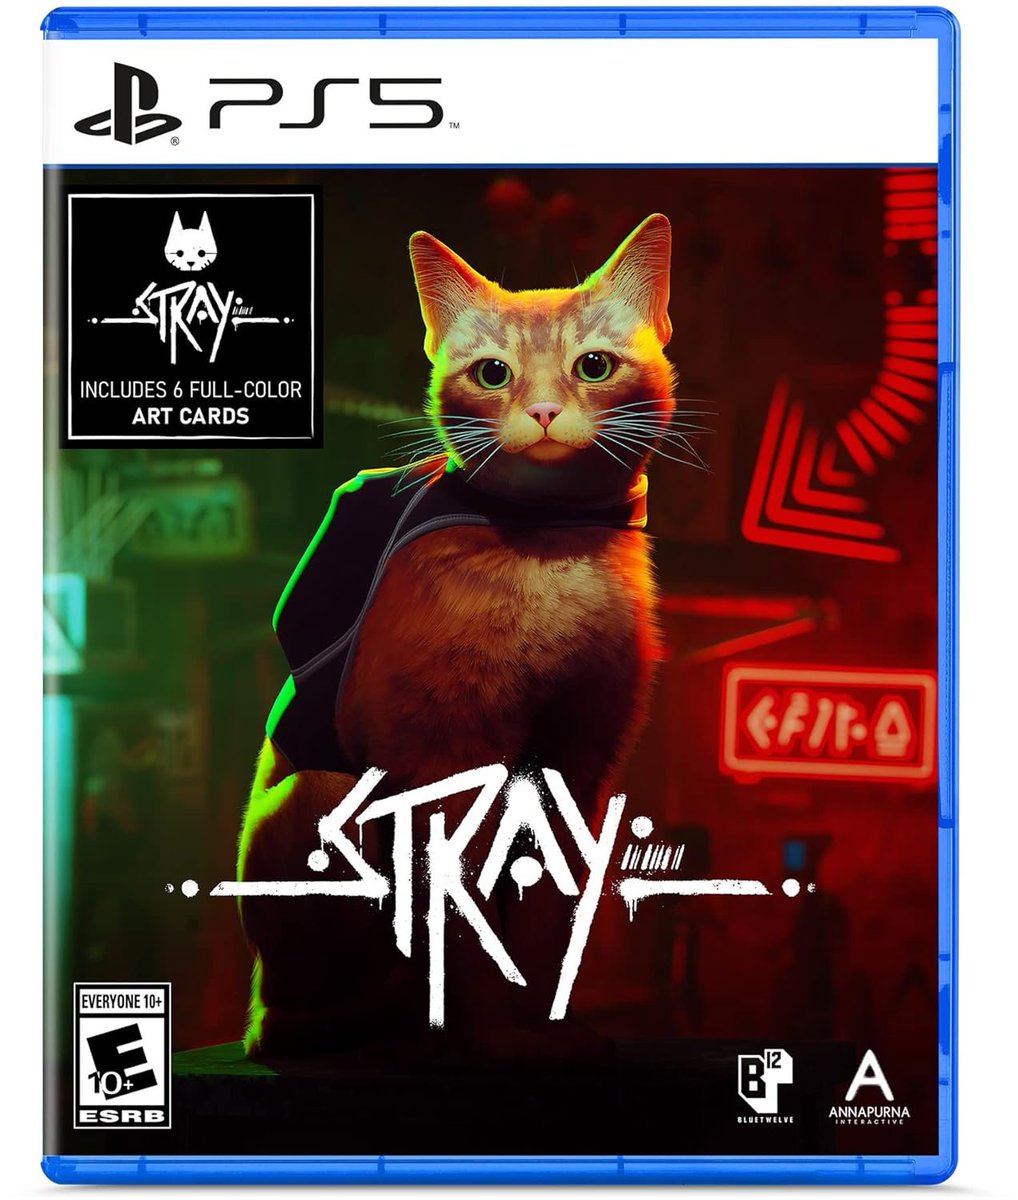 Stray (PS5) is $22 on Amazon amzn.to/3JwTfRK #ad